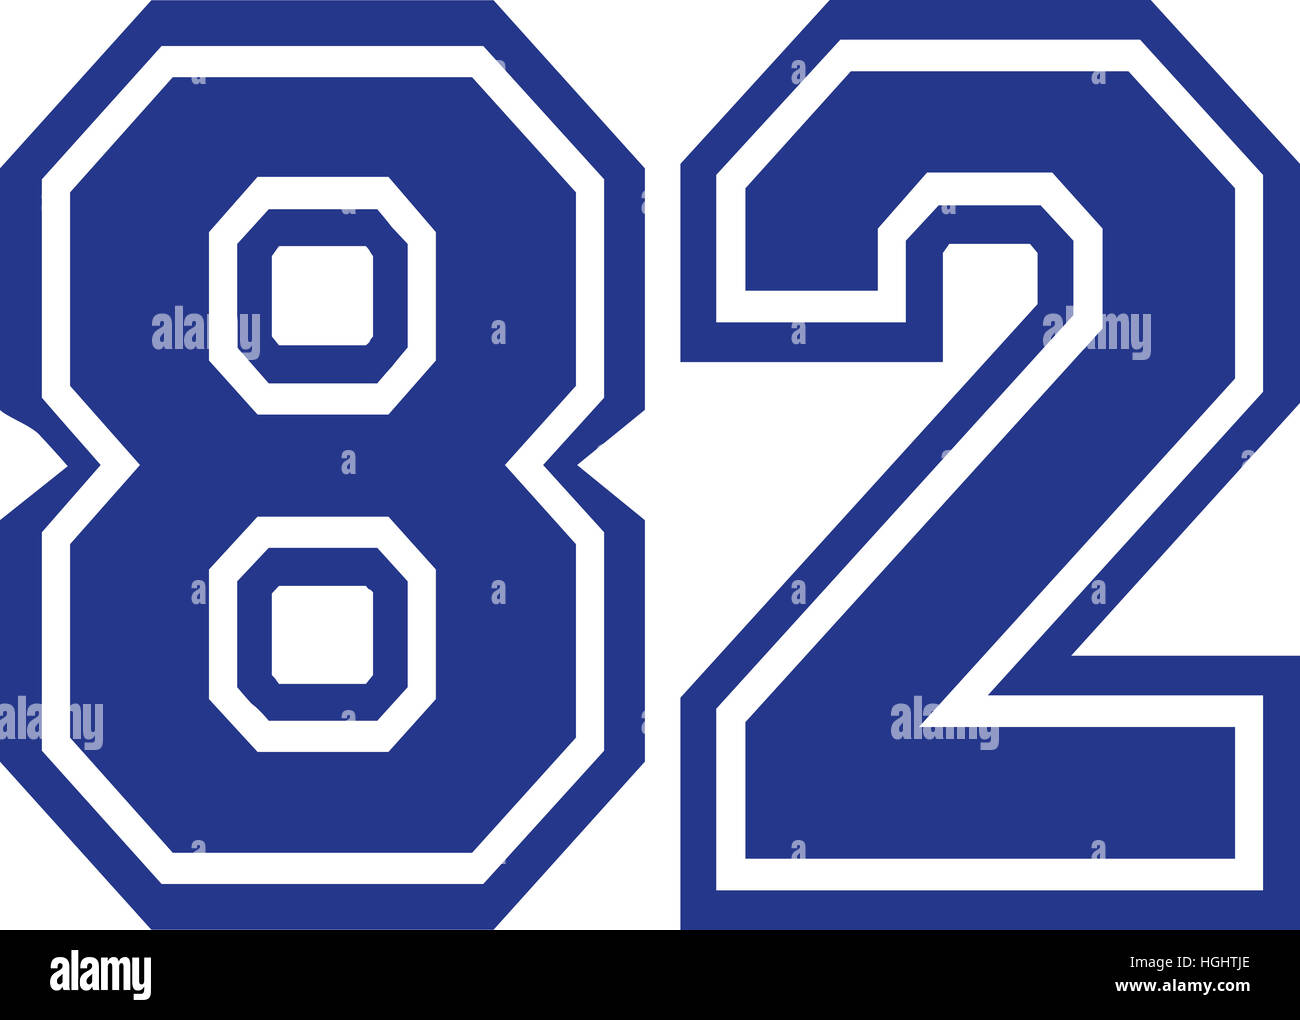 Eighty two College Number 82 Stock Photo Alamy